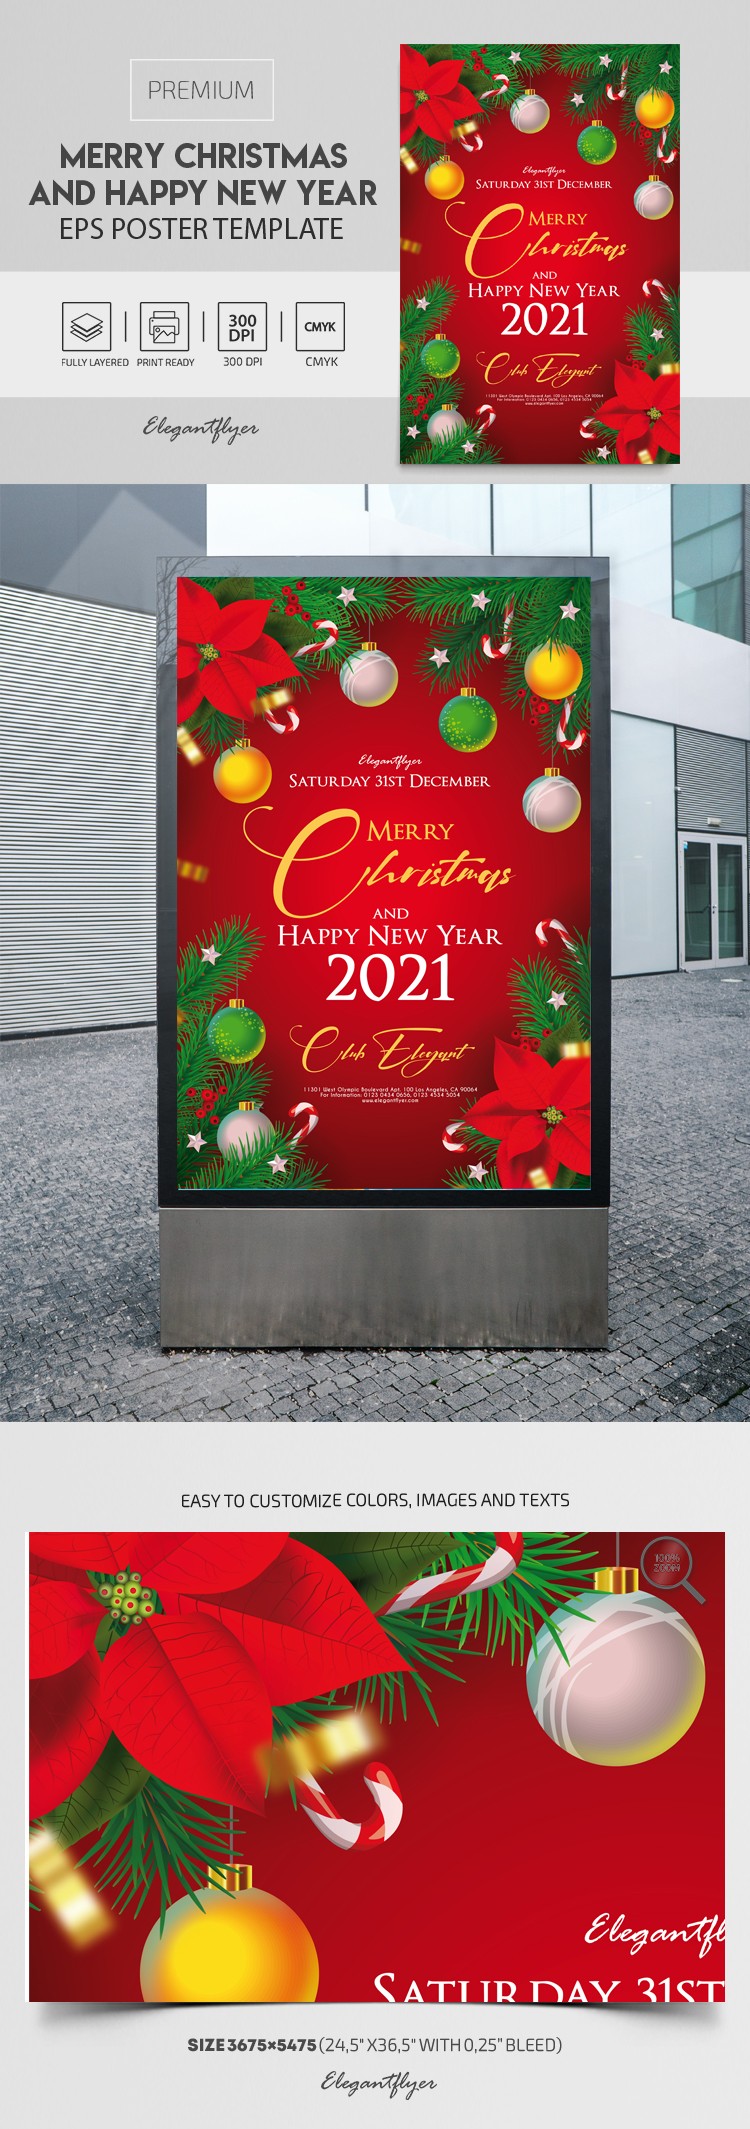 Merry Christmas and Happy New Year Poster EPS by ElegantFlyer